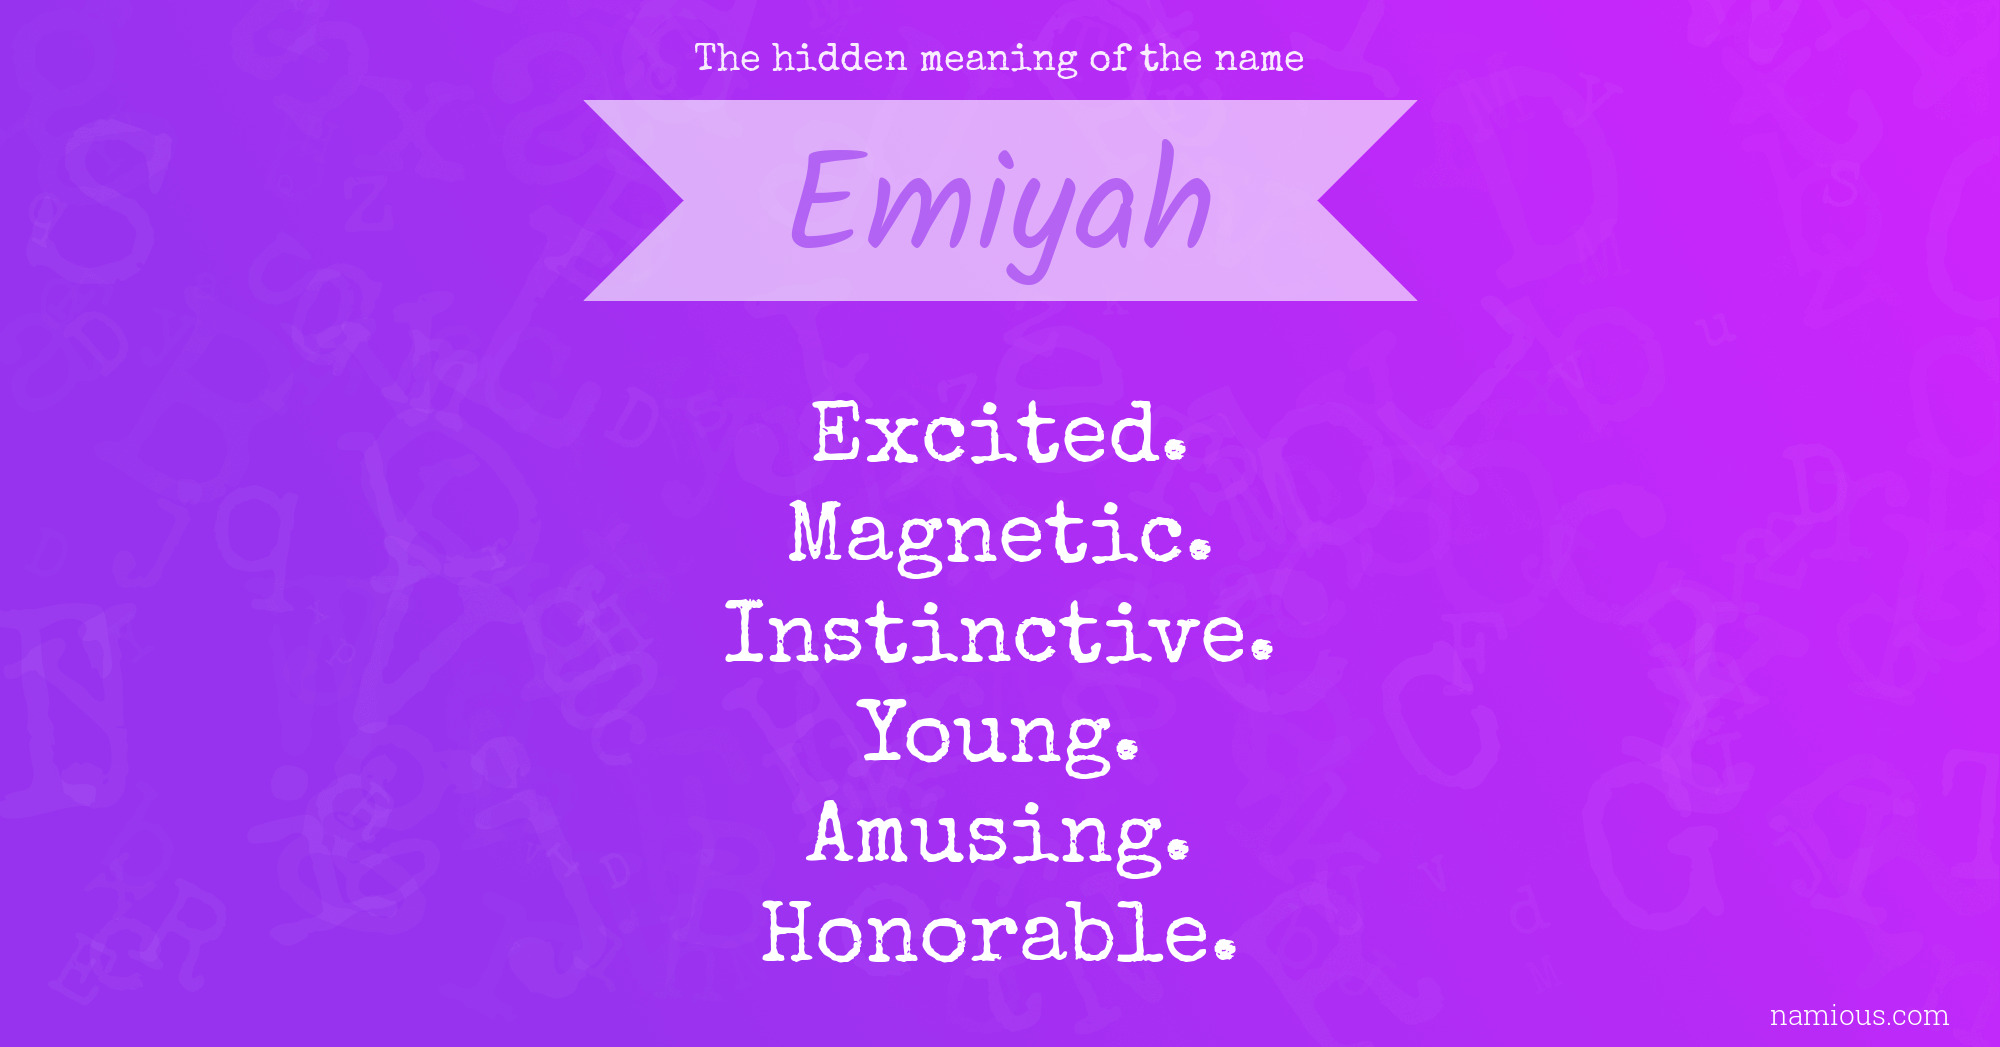 The hidden meaning of the name Emiyah